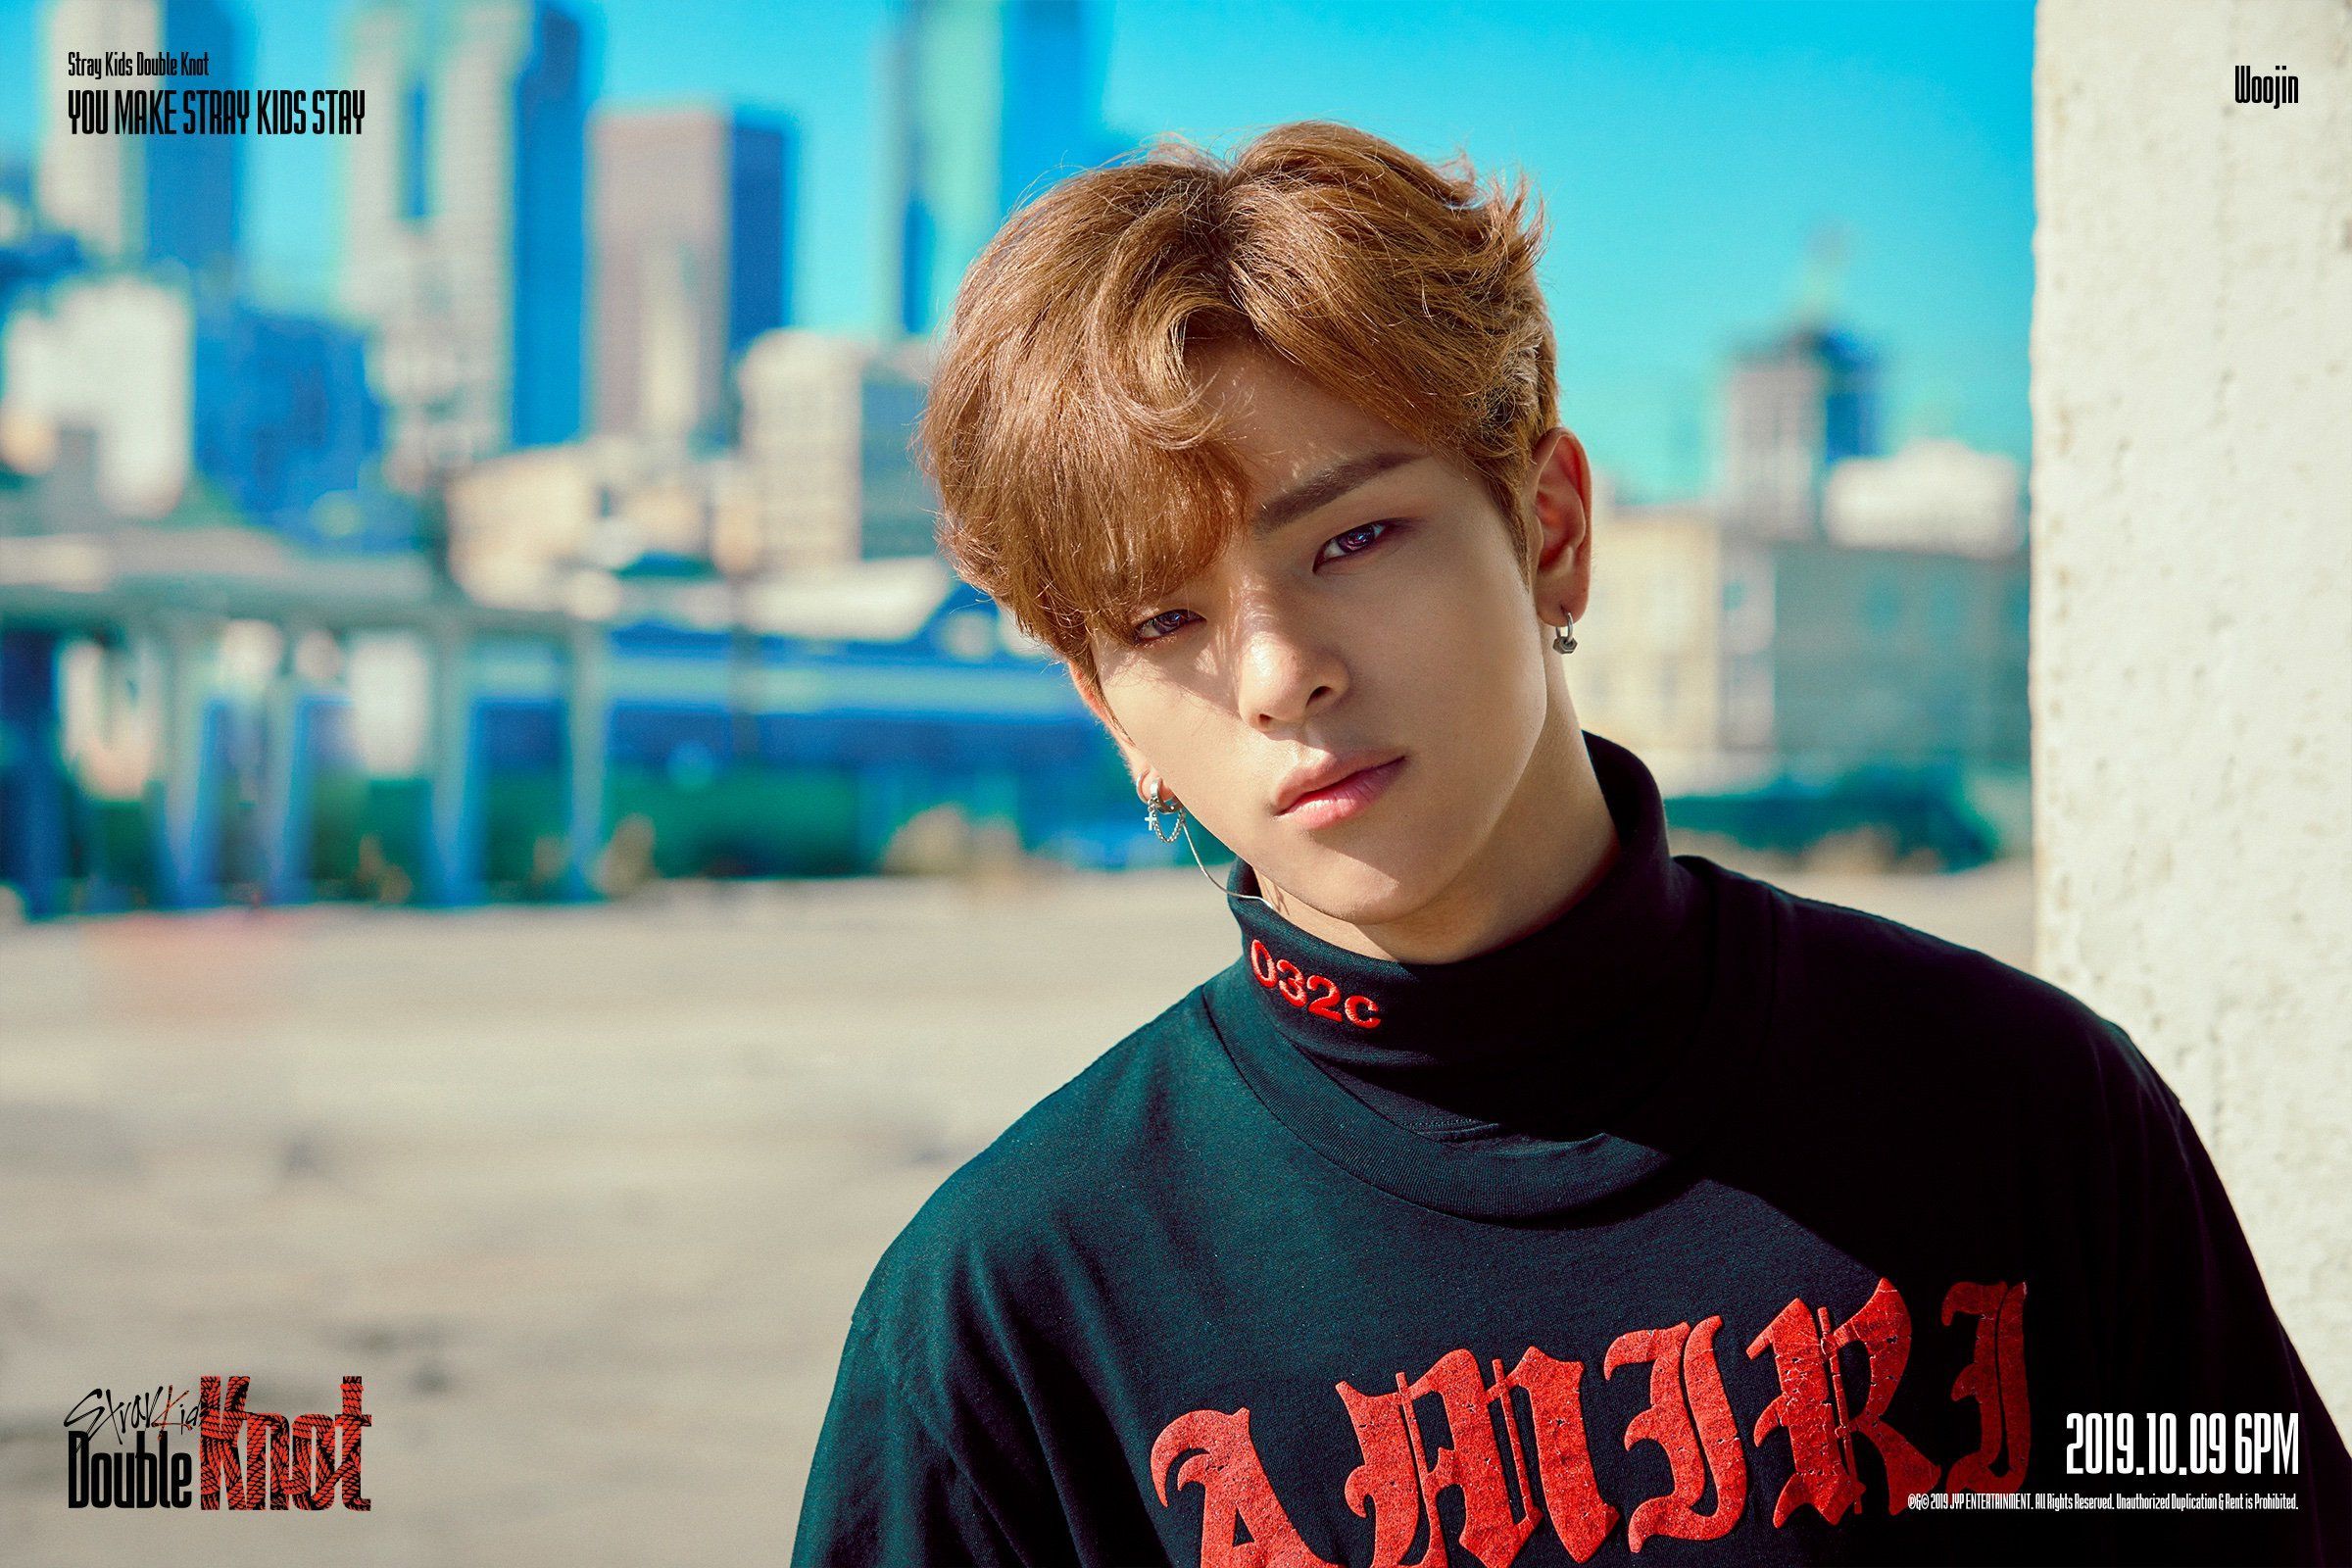 Stray Kids Double Knot Teaser Image